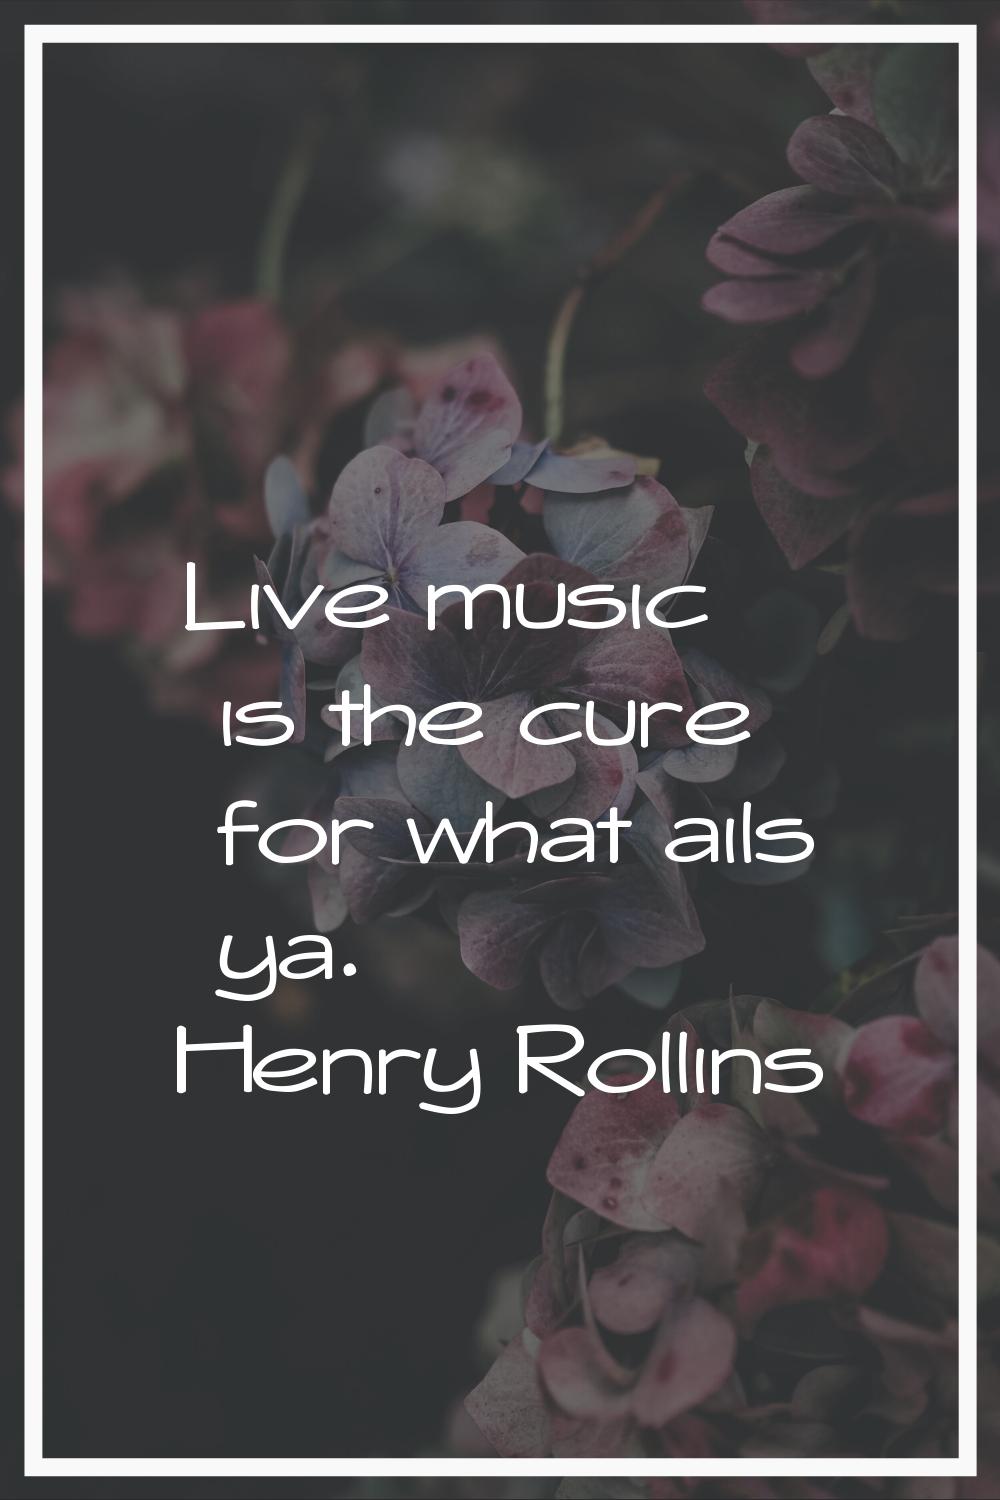 Live music is the cure for what ails ya.